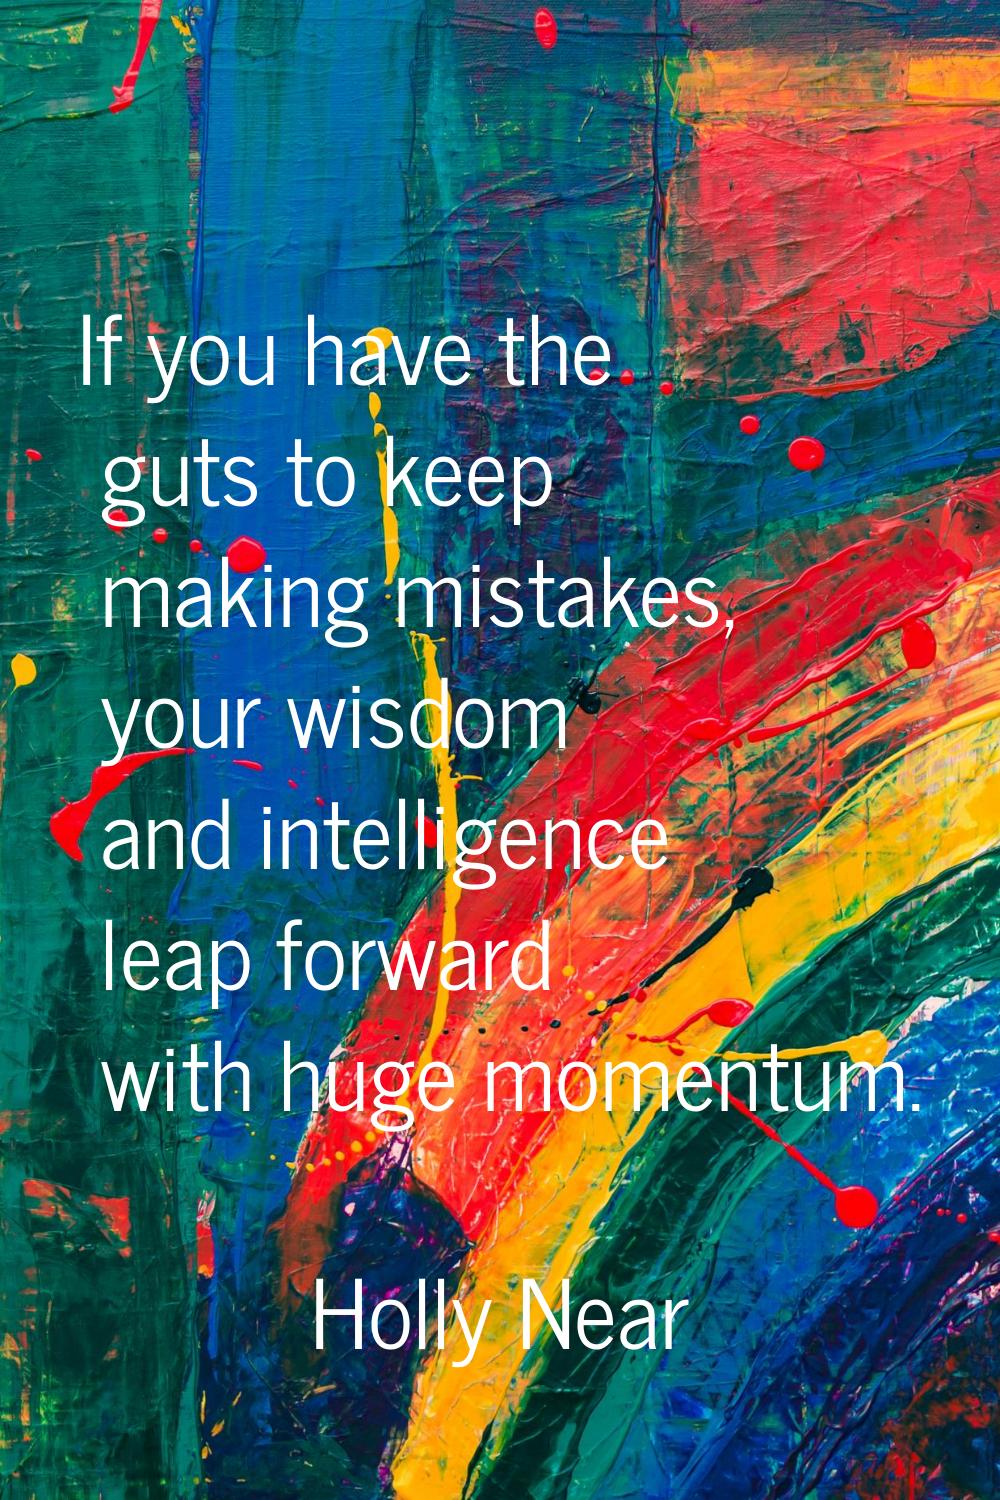 If you have the guts to keep making mistakes, your wisdom and intelligence leap forward with huge m